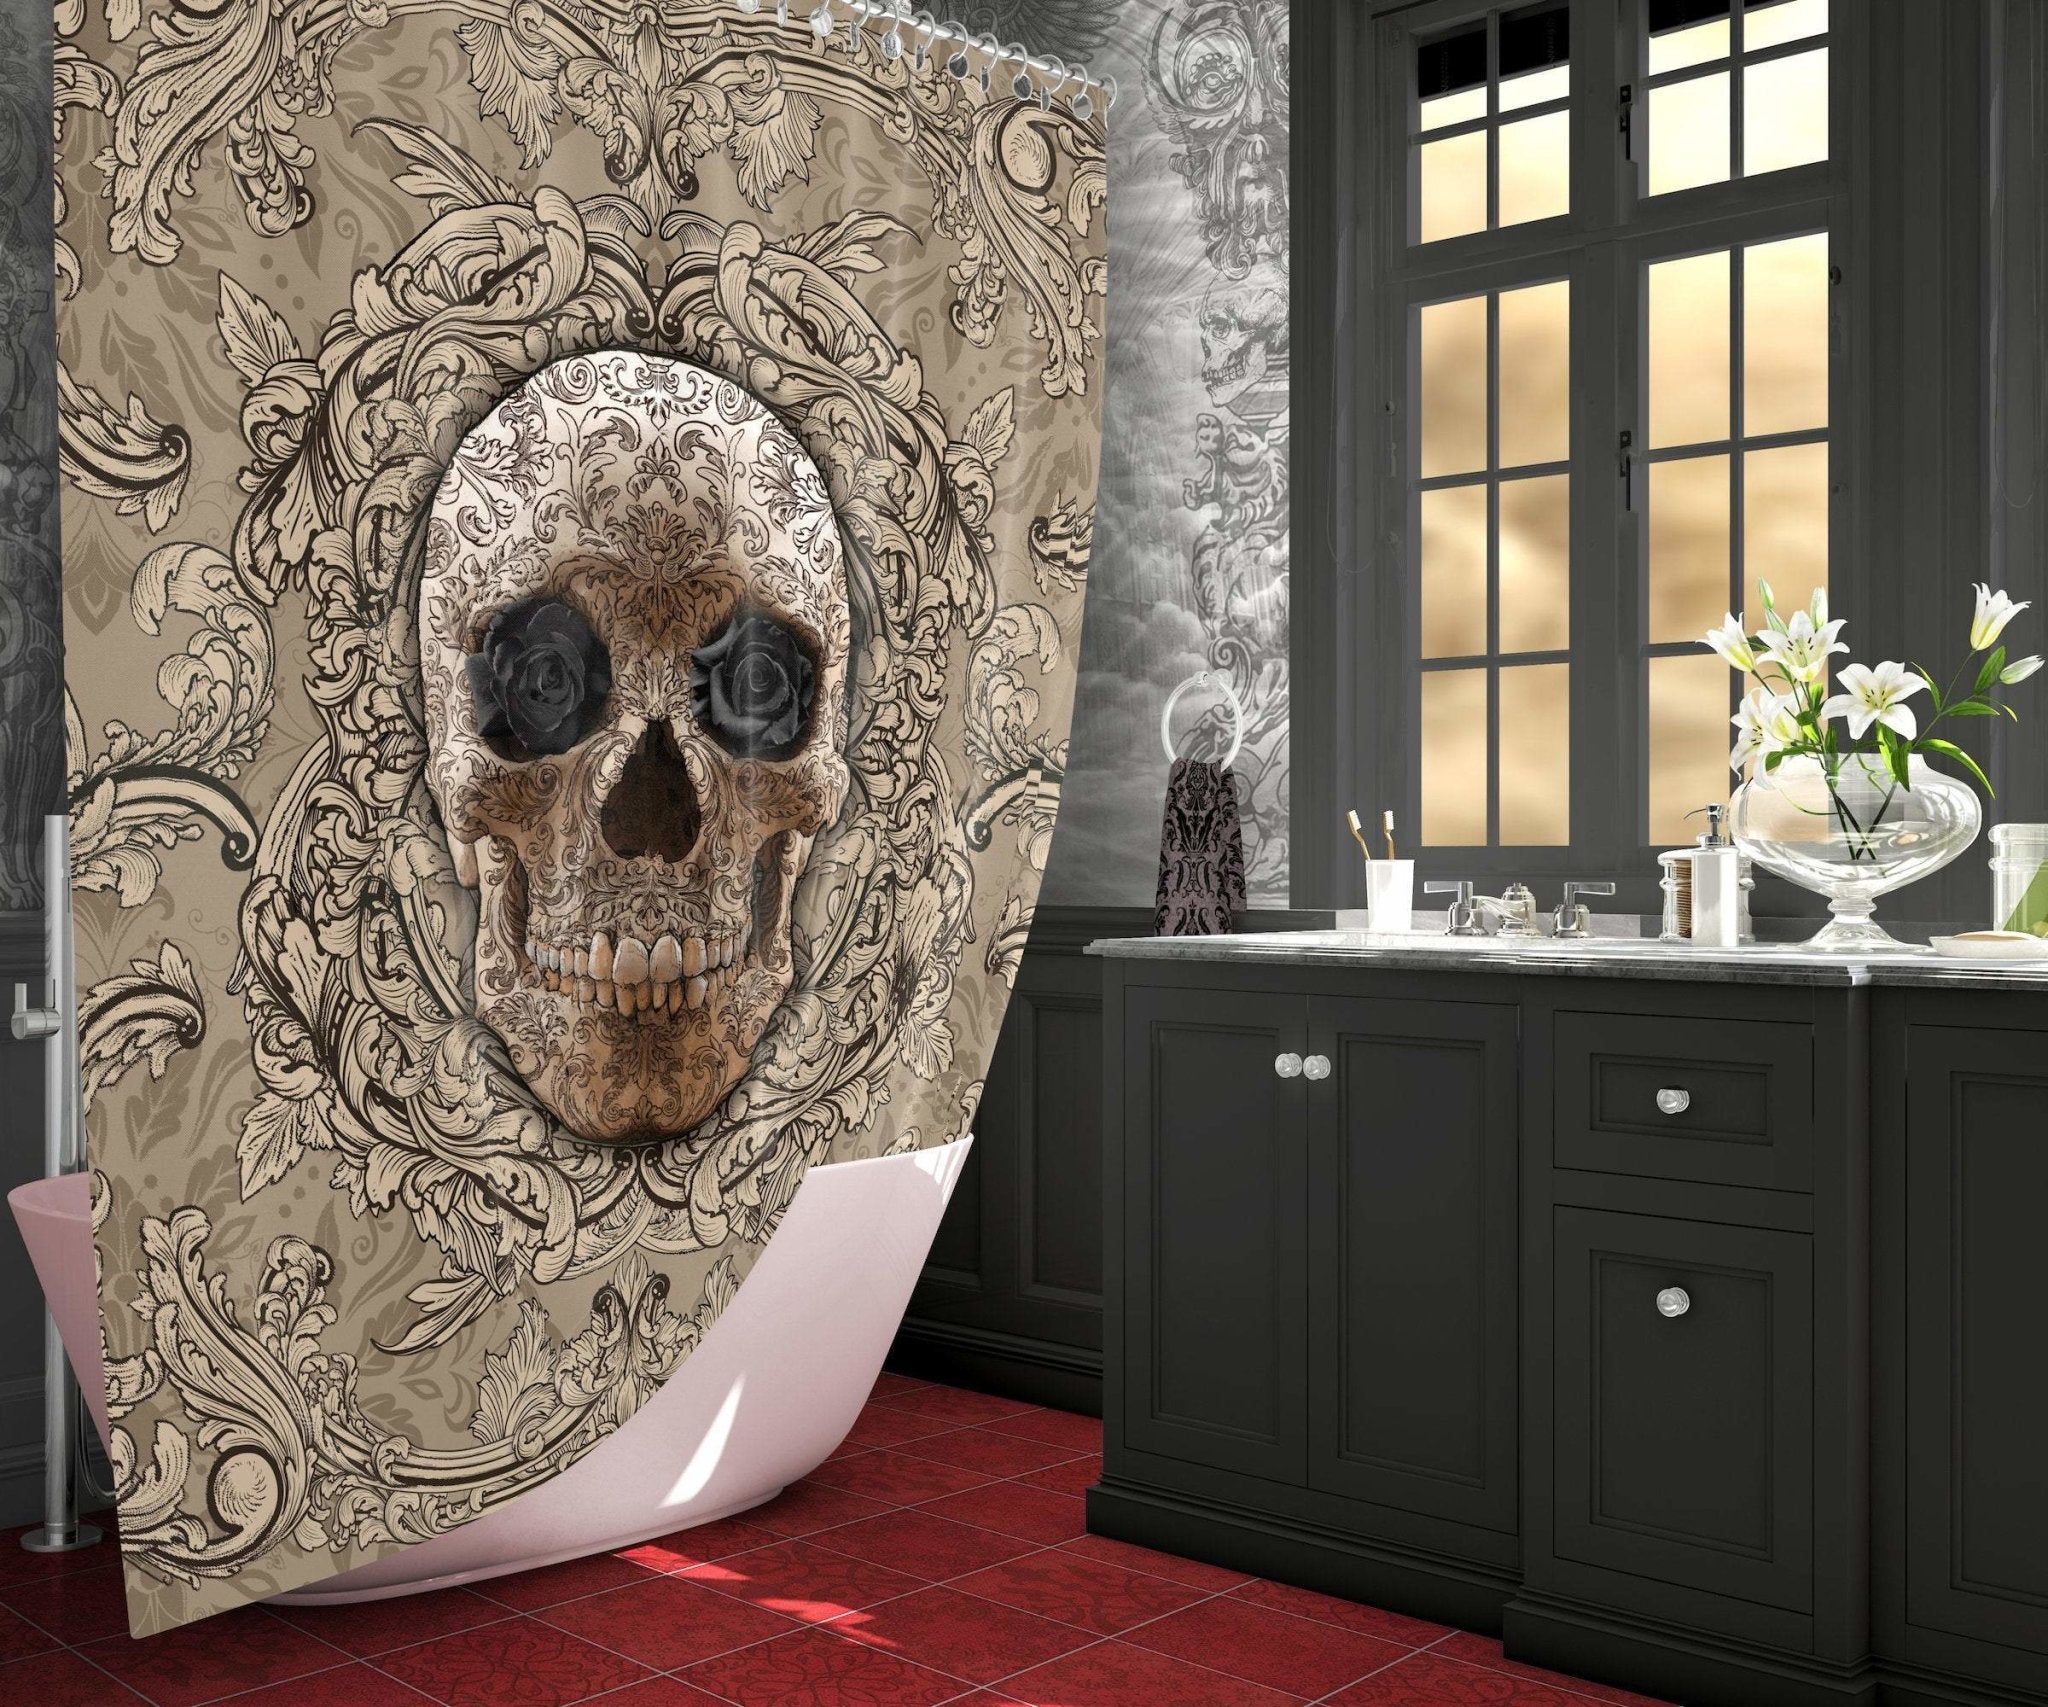 Skull Shower Curtain, Gothic Bathroom Decor, Macabre Art, Eclectic and Funky Home - Cream - Abysm Internal